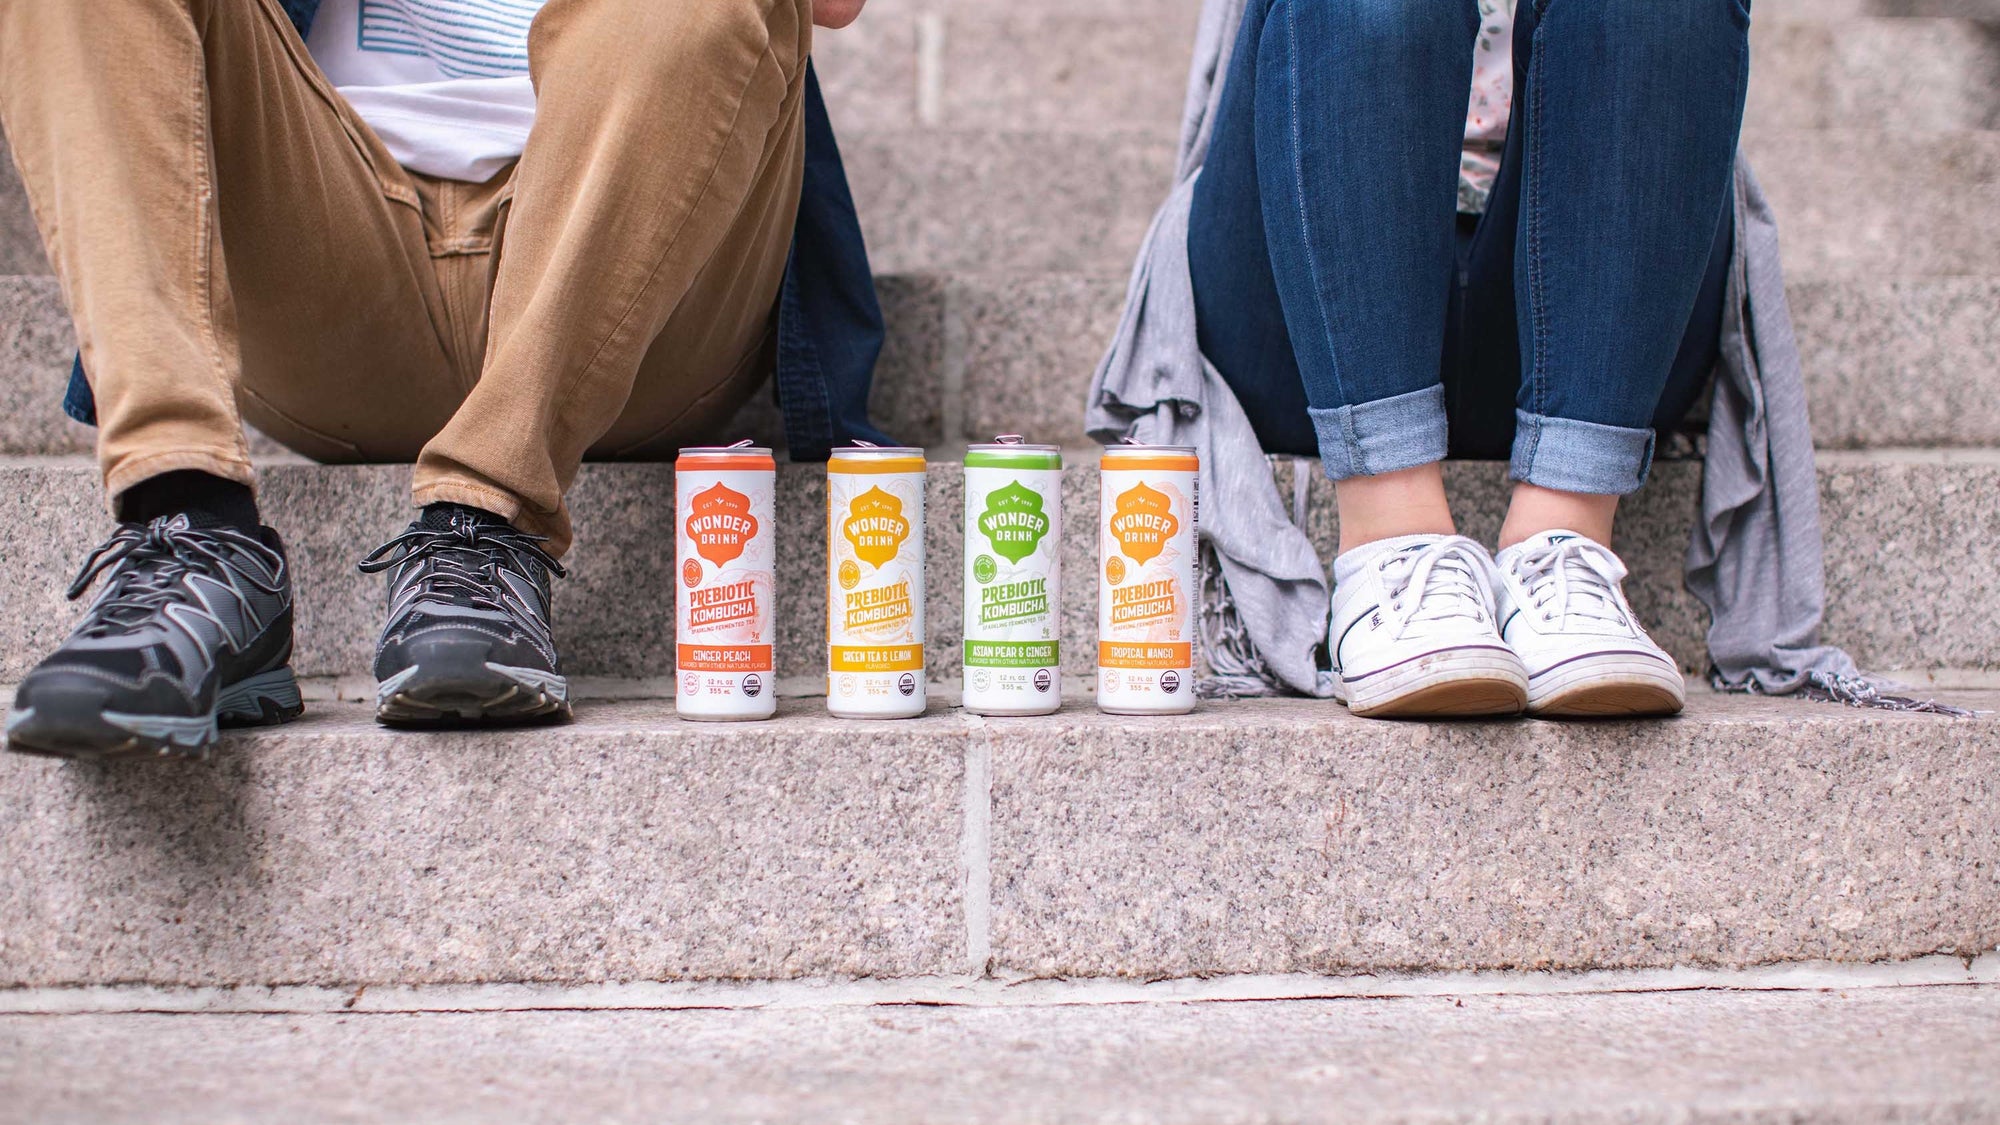 Two people sitting on public steps with cans of wonder drink between them